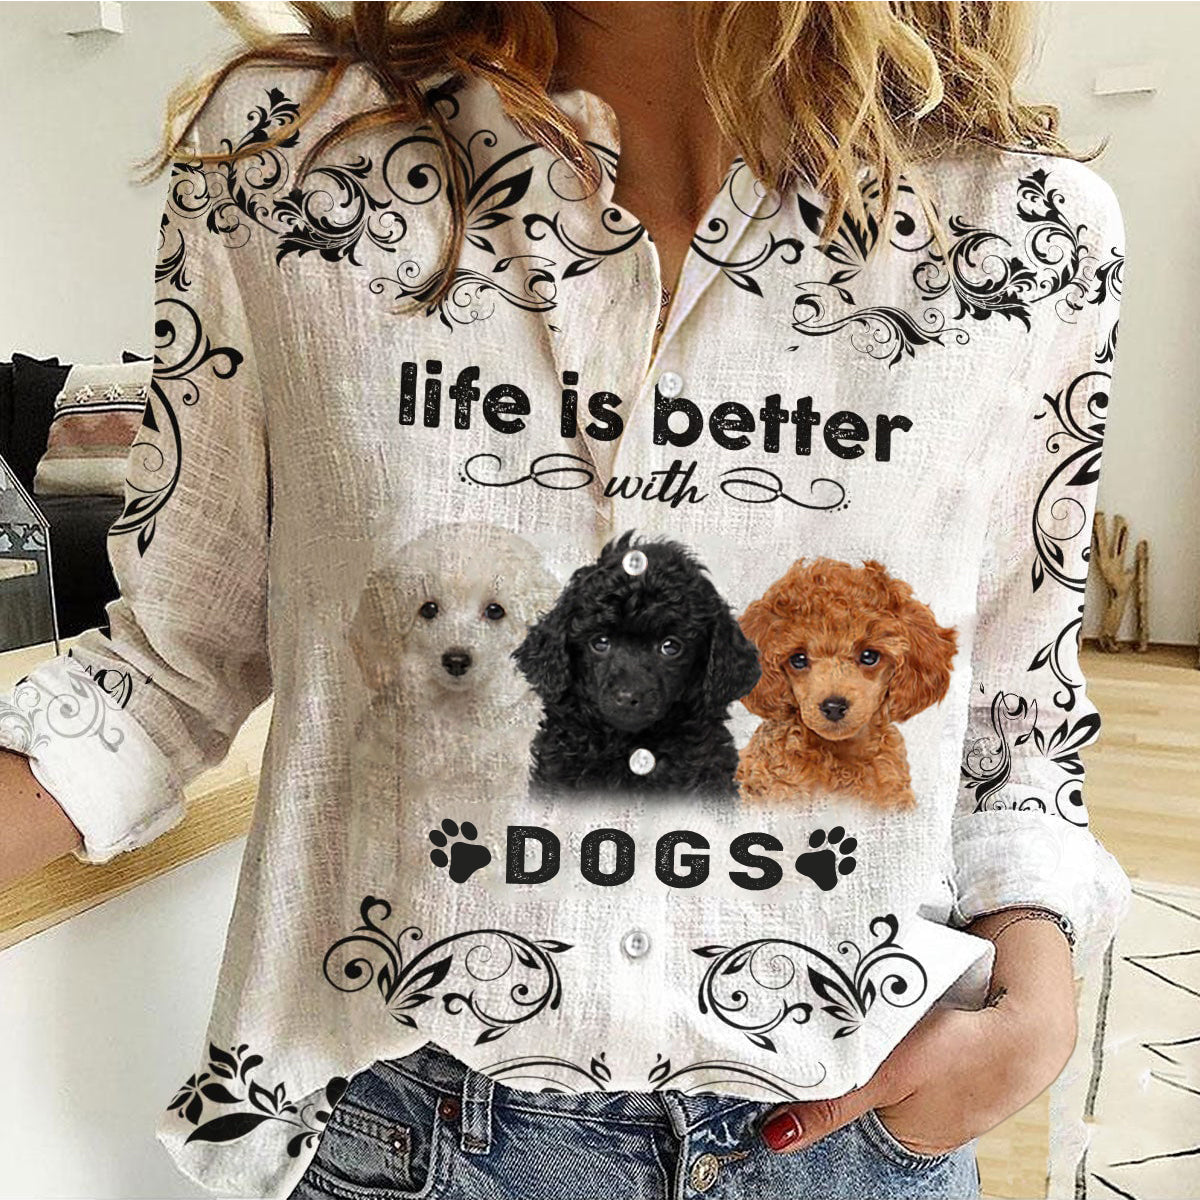 Toy Poodle - Life Is Better With Dogs Women's Long-Sleeve Shirt